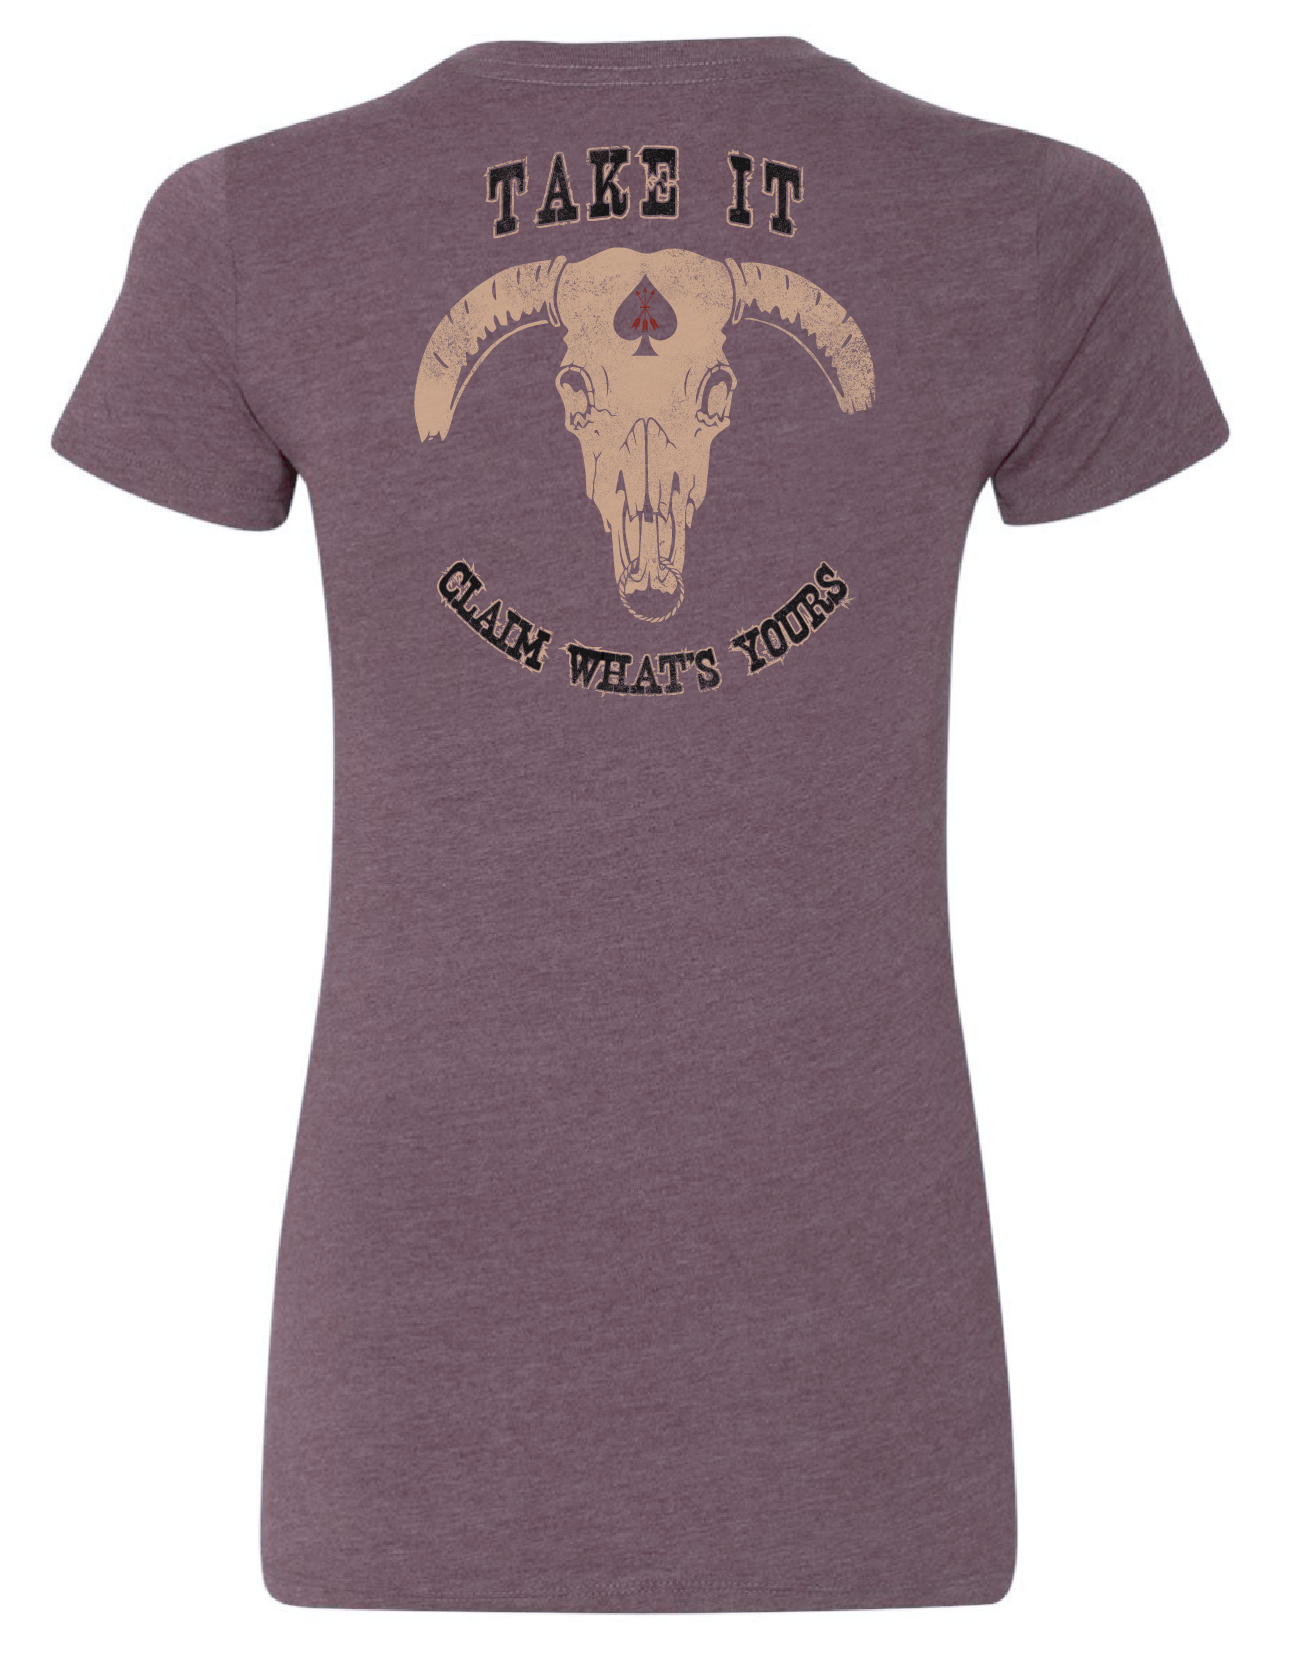 "Take It, Claim What's Yours" Women's Tee, Bullhead with Spade